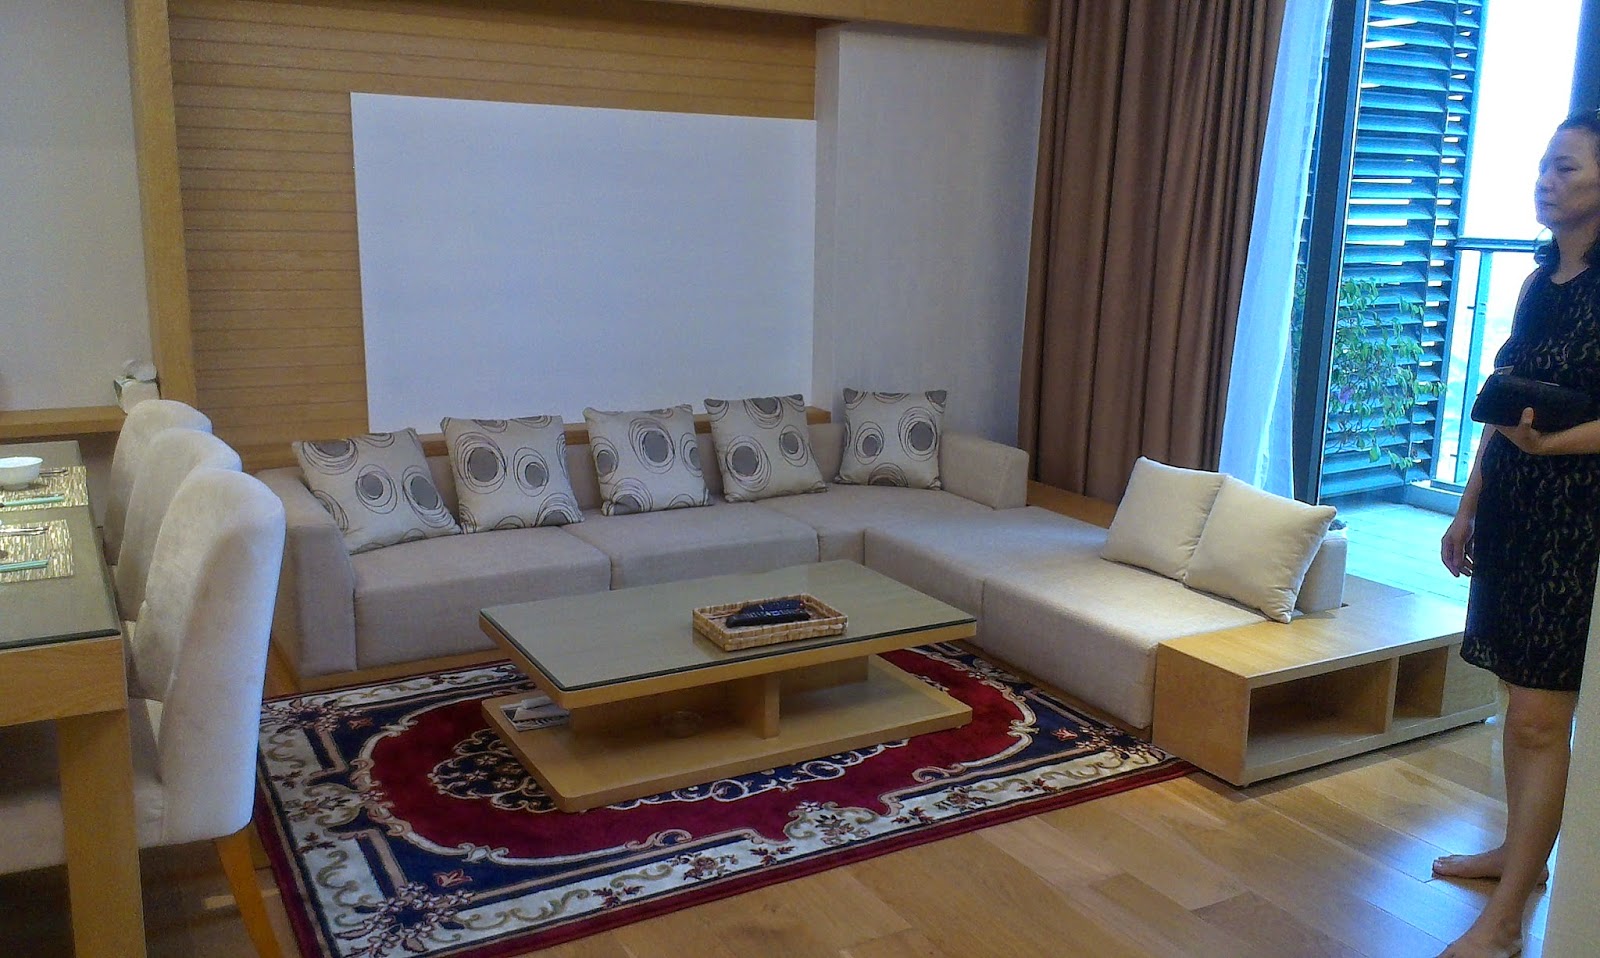 A luxury apartment in The Indochina Plaza for renting (1700$) IMAG0134